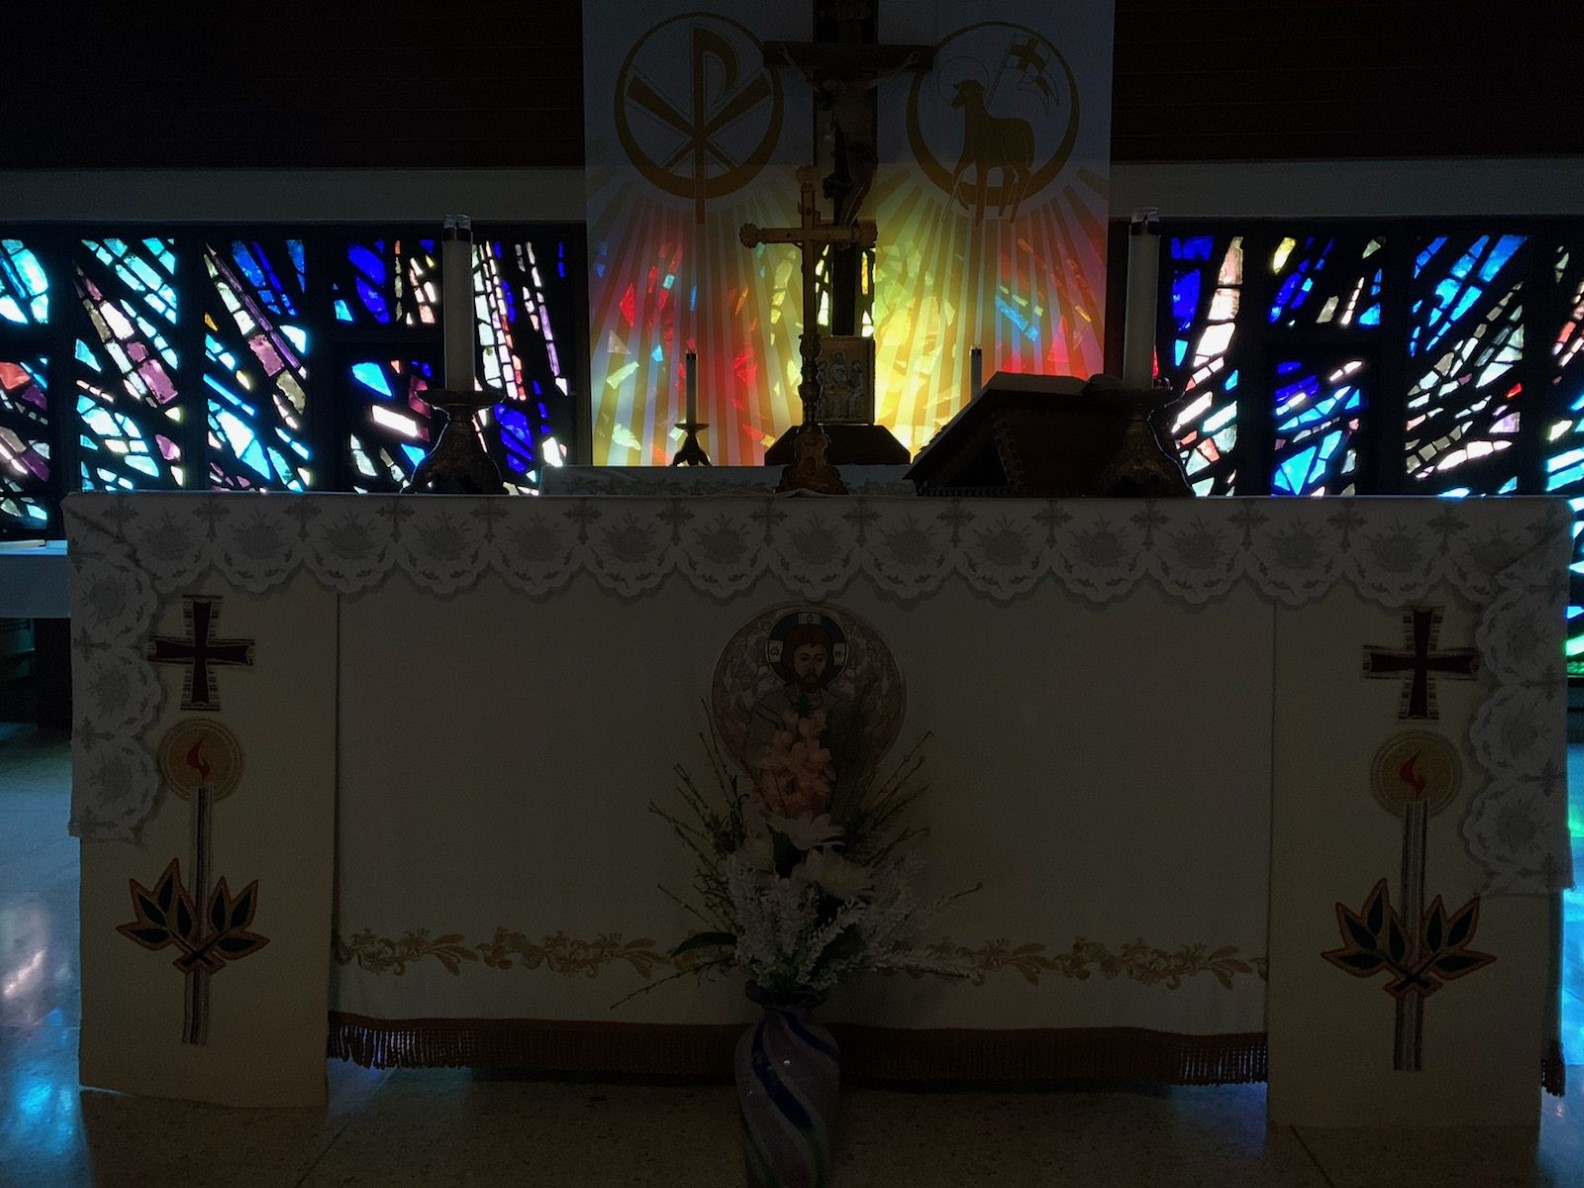 Altar with stained glass lighting in background